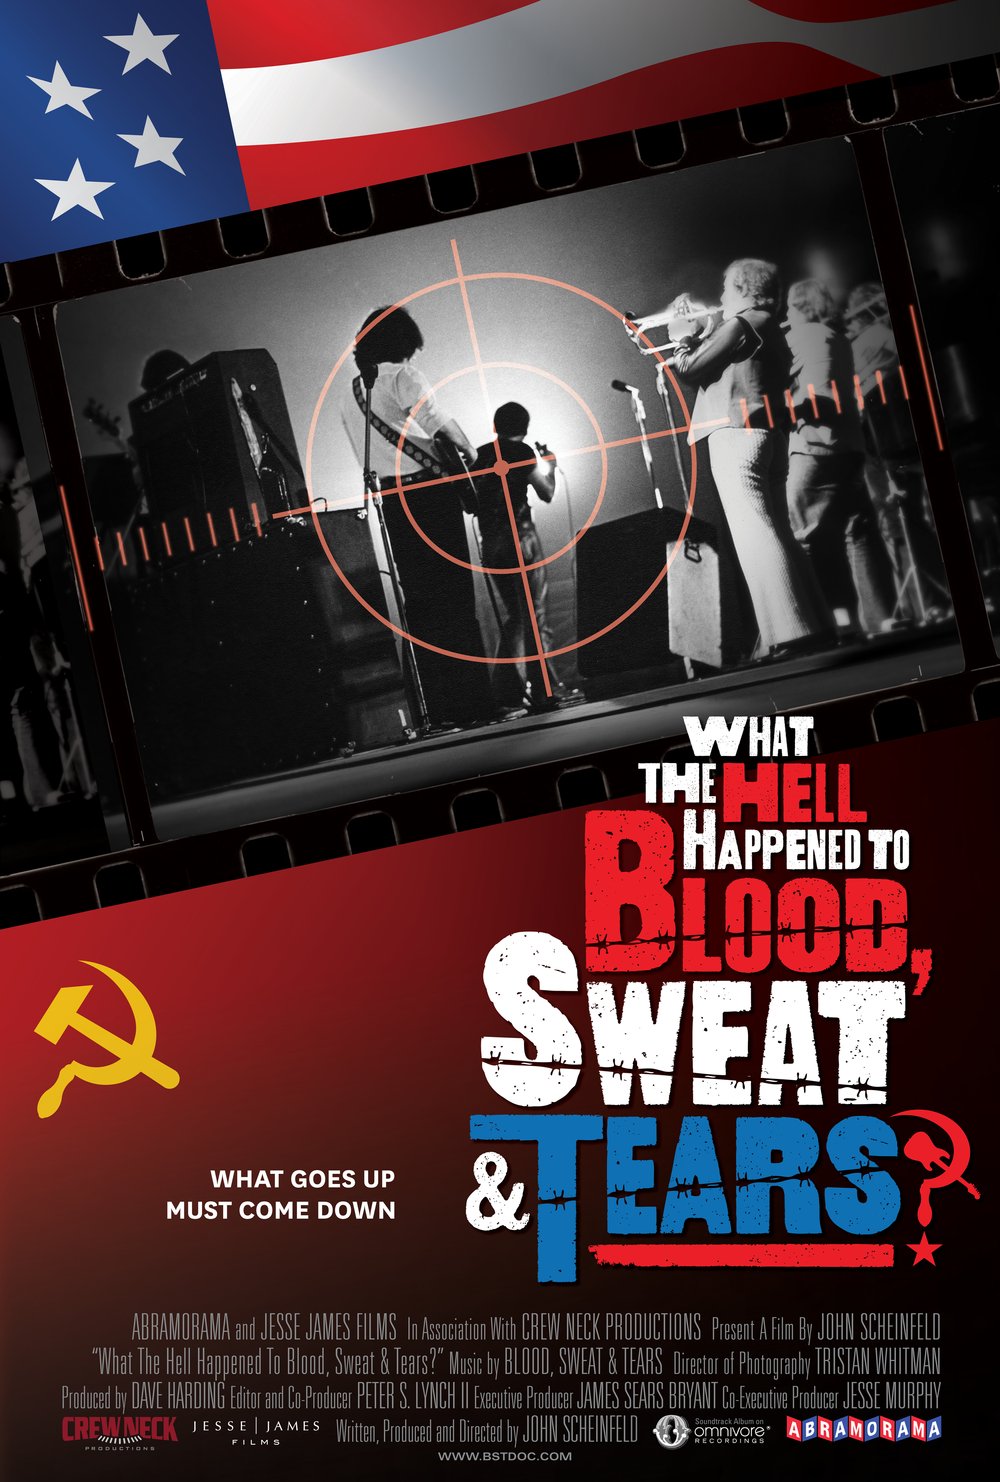 What the Hell Happened To Blood, Sweat & Tears? — ABRAMORAMA